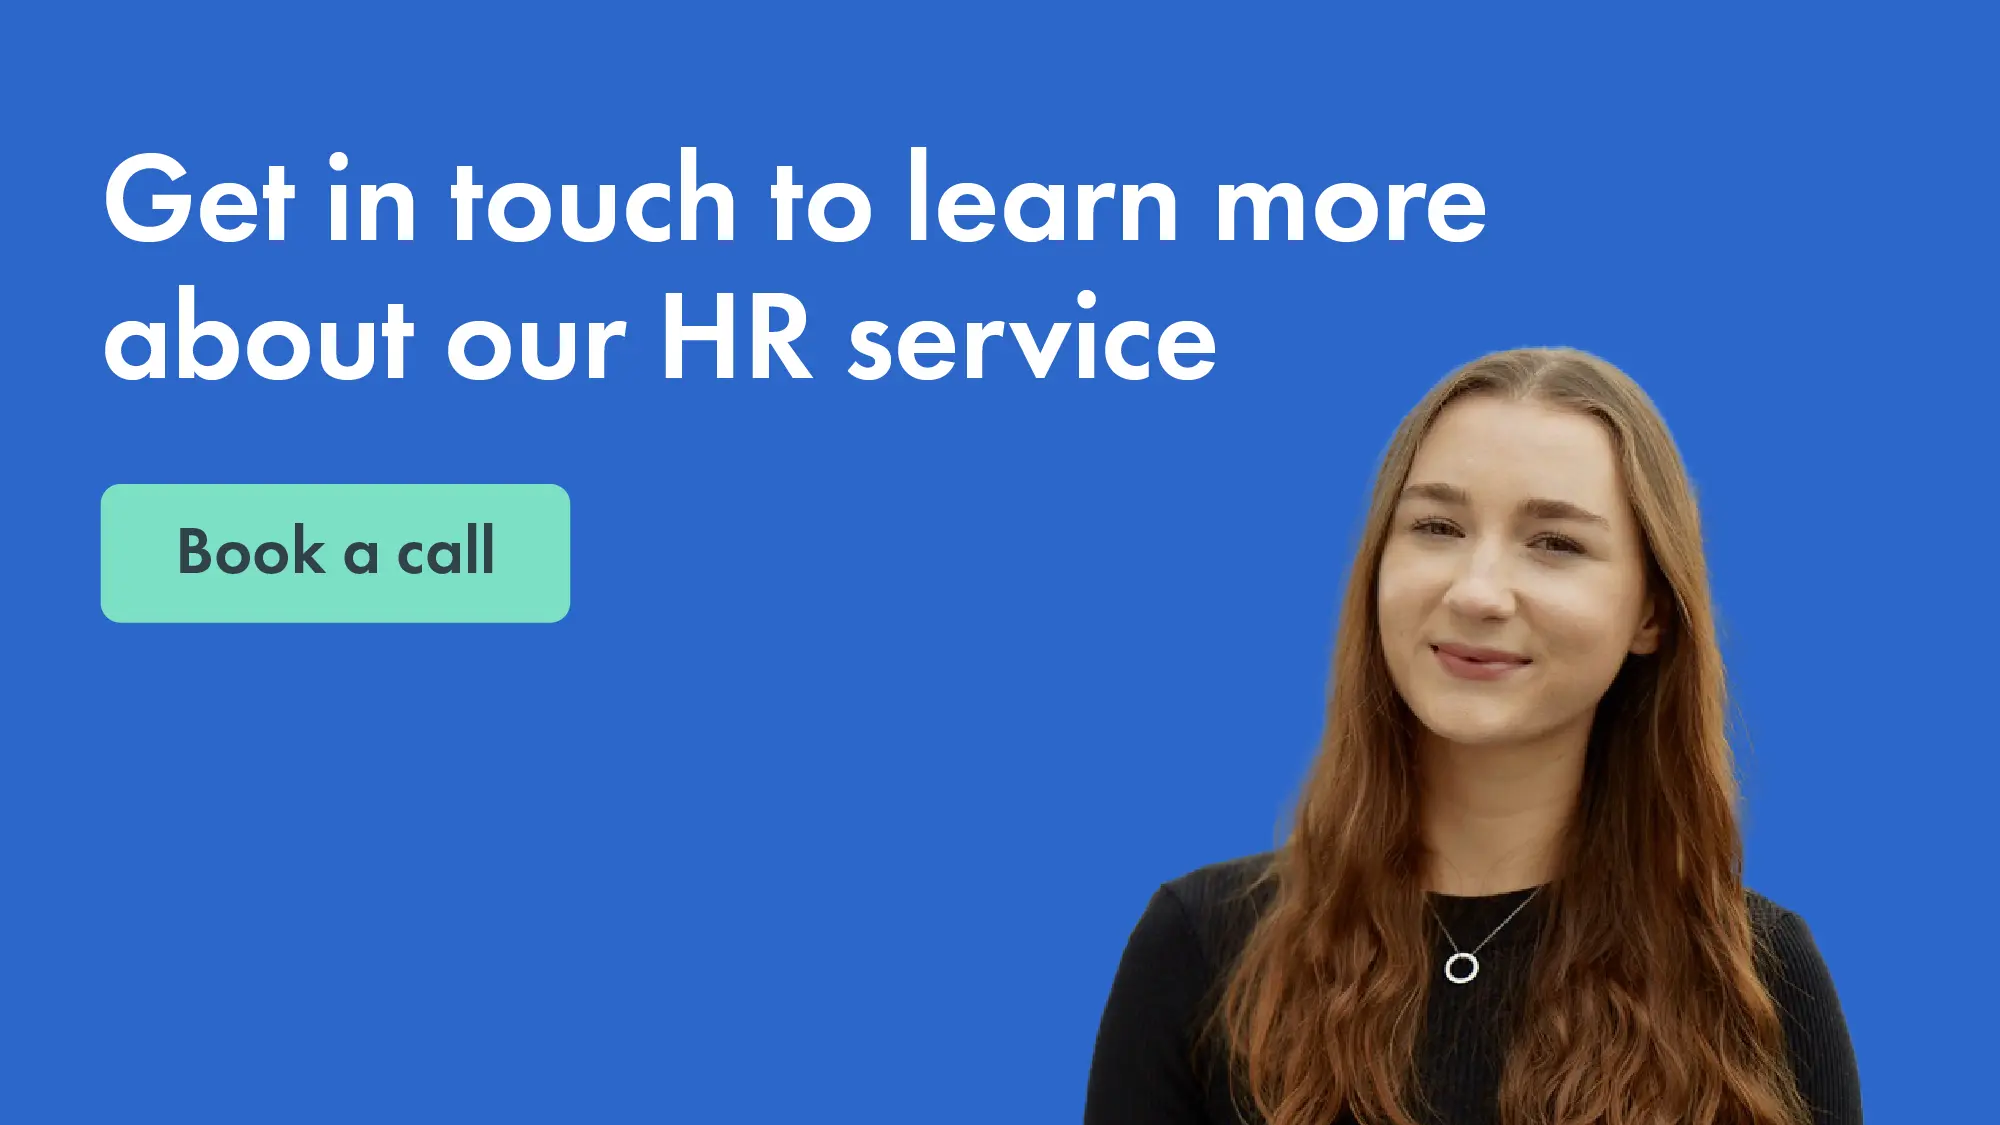 Click here to book a call with our HR advisors